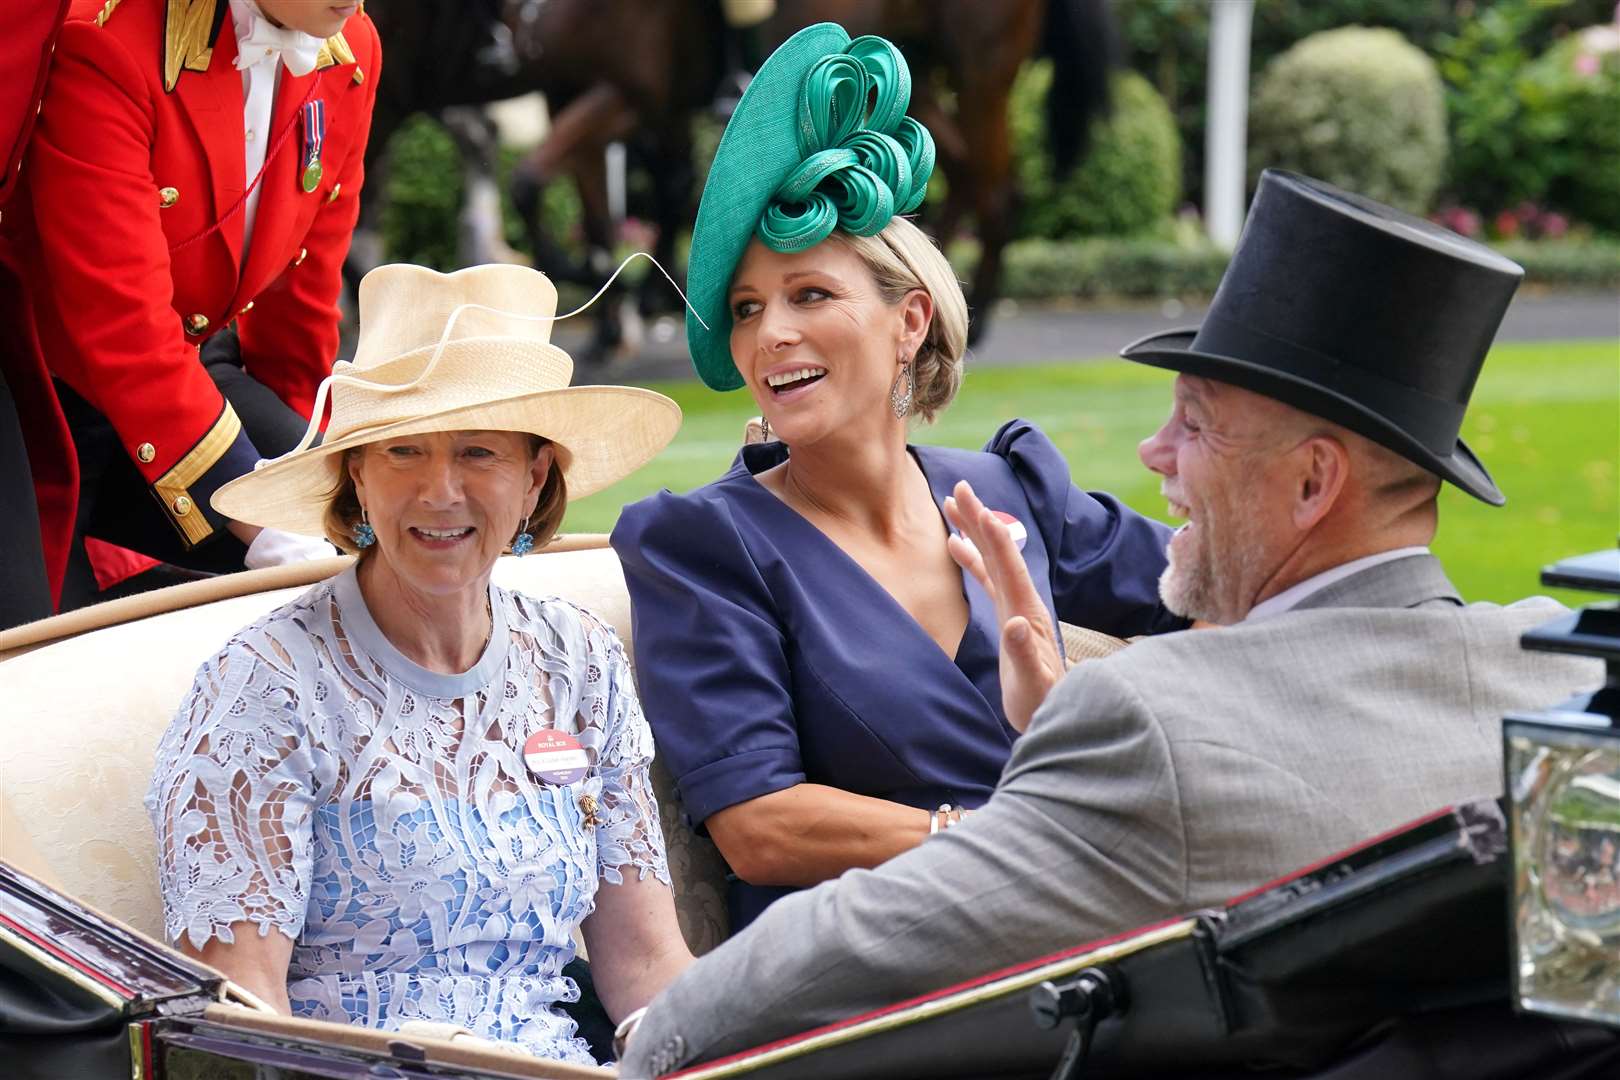 Zara Tindall, Maureen Haggas and Mike Tindall were part of the royal carriage procession (Jonathan Brady/PA)